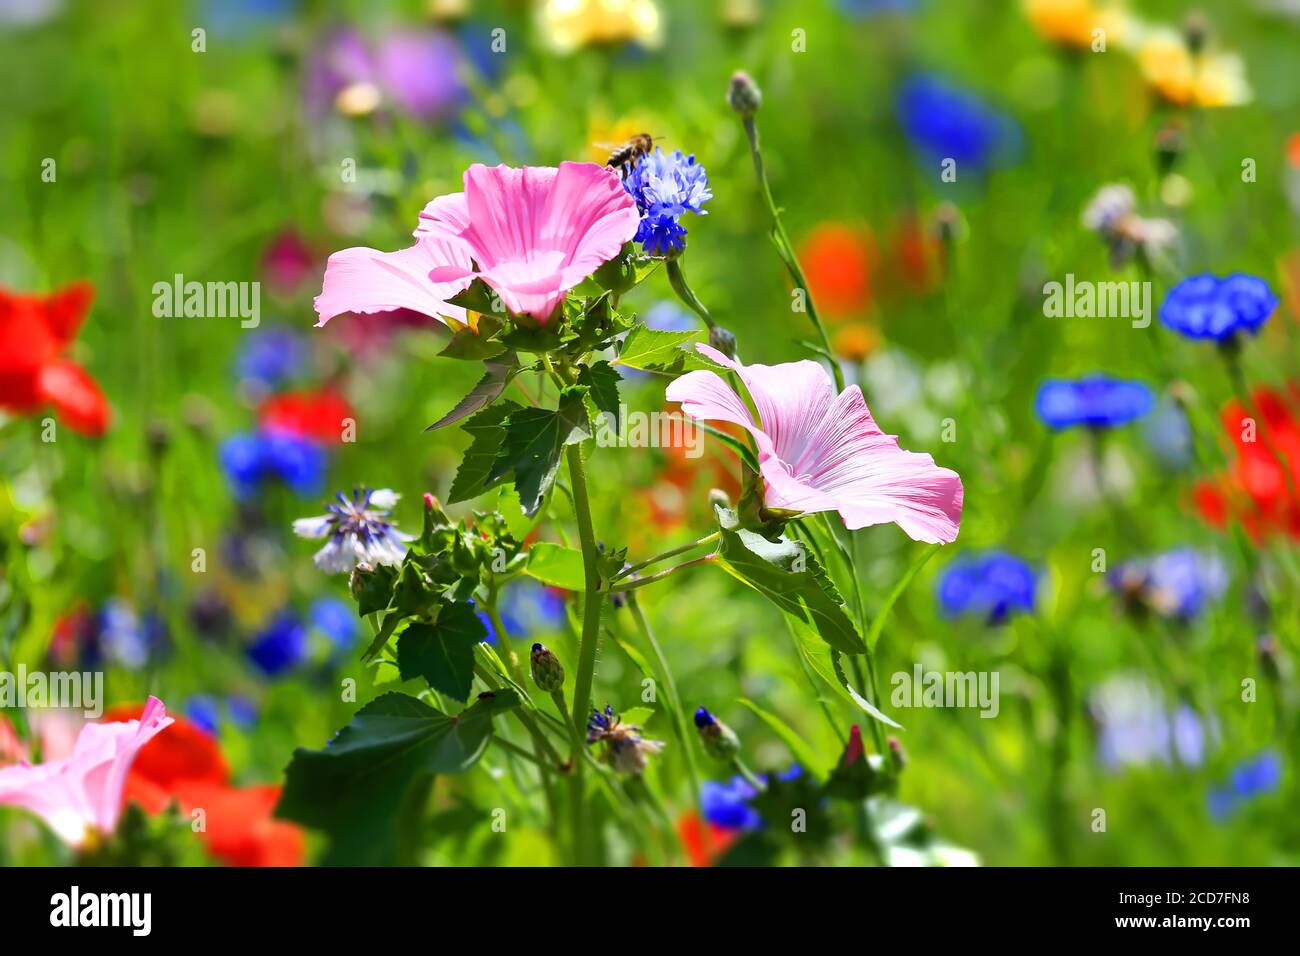 beautiful natural colorful flower meadow Stock Photo